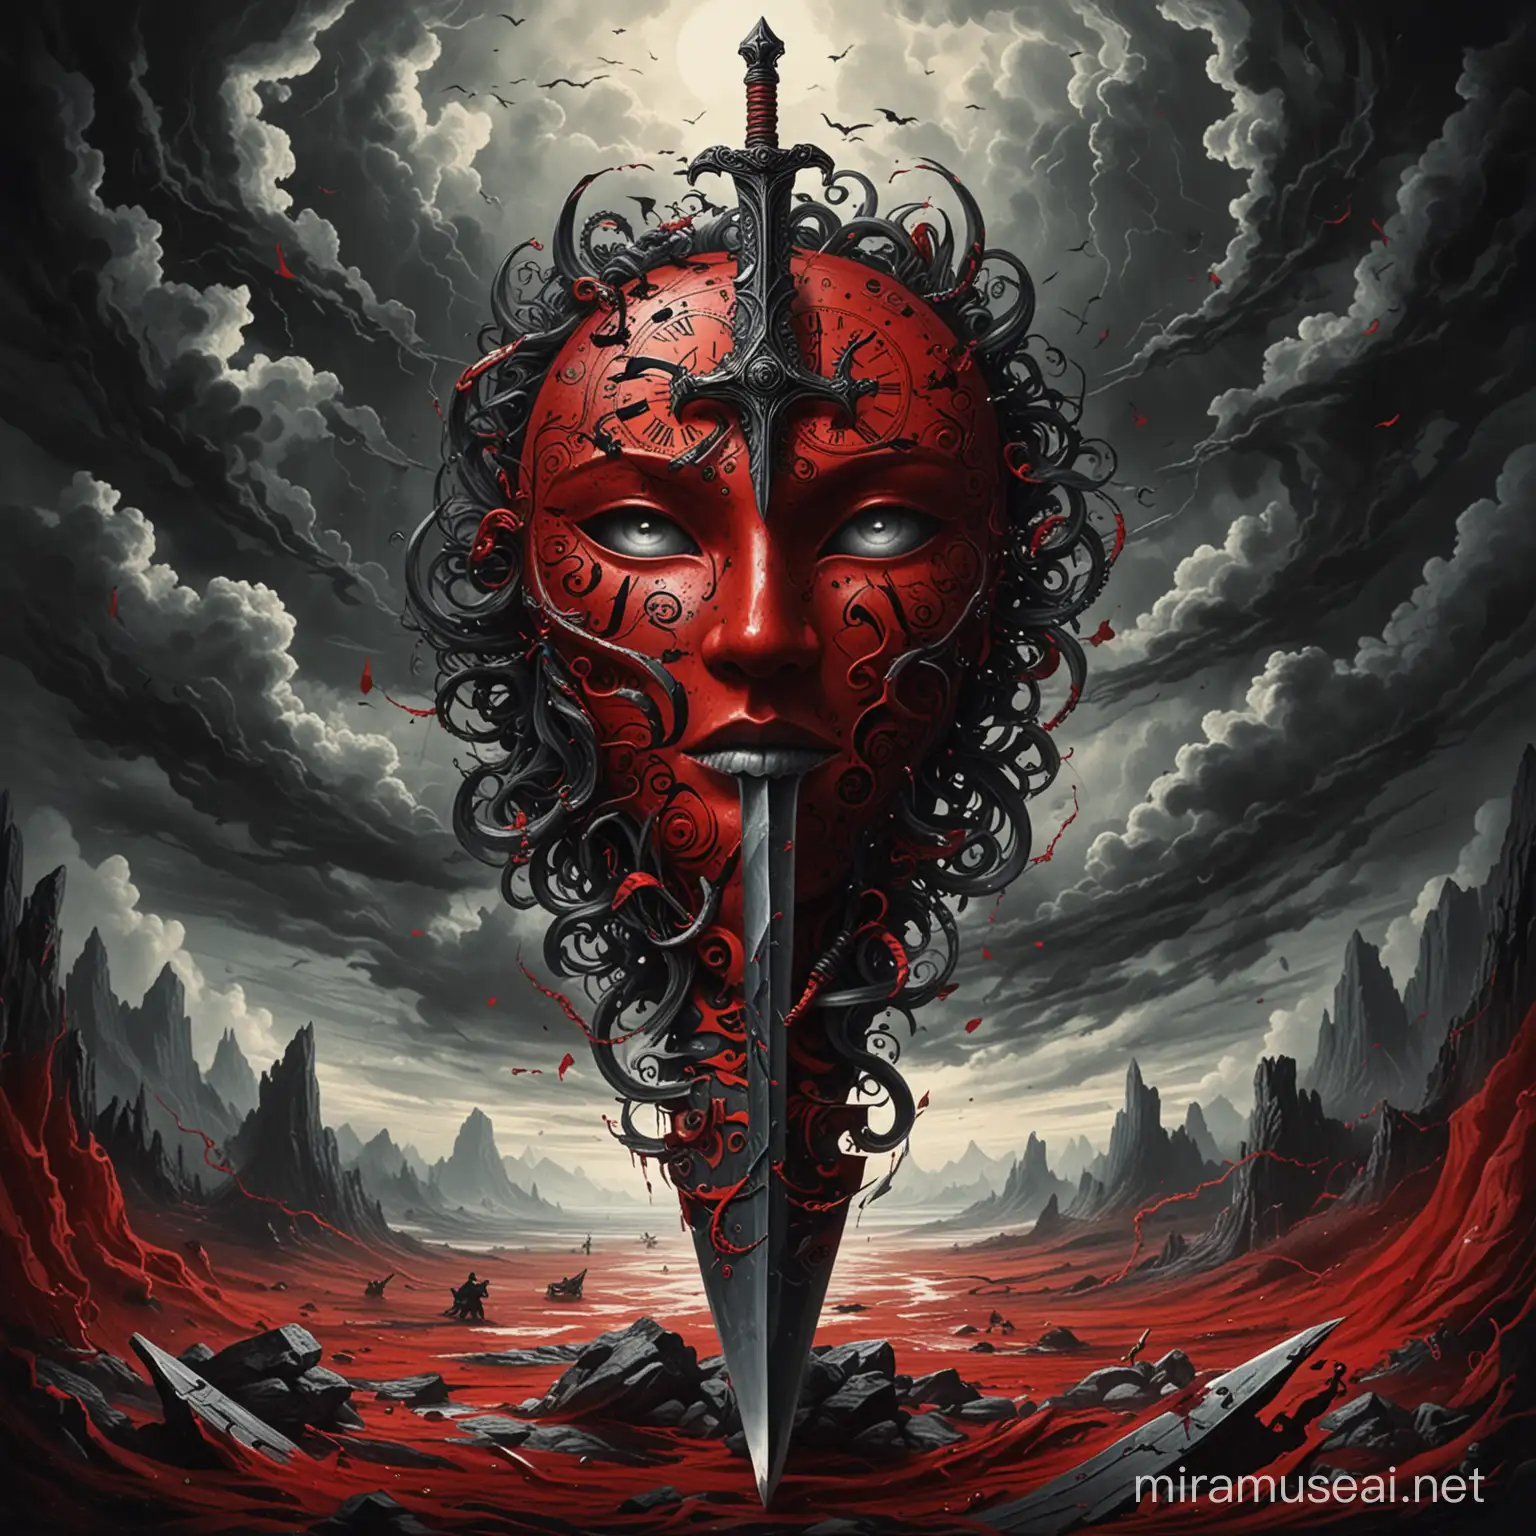 Chain, symbolizing inner slavery.
Dagger, symbolizing internal conflicts.
Mask, as a representation of the hidden self.
Clock, symbolizing attachment to the past

Red and black swirling paintings depicting the storms within.
A surreal landscape, reflecting the inner chaos.
A game of shadows, symbolizing hidden demons.
Typography highlighting the title "Inner Demons".